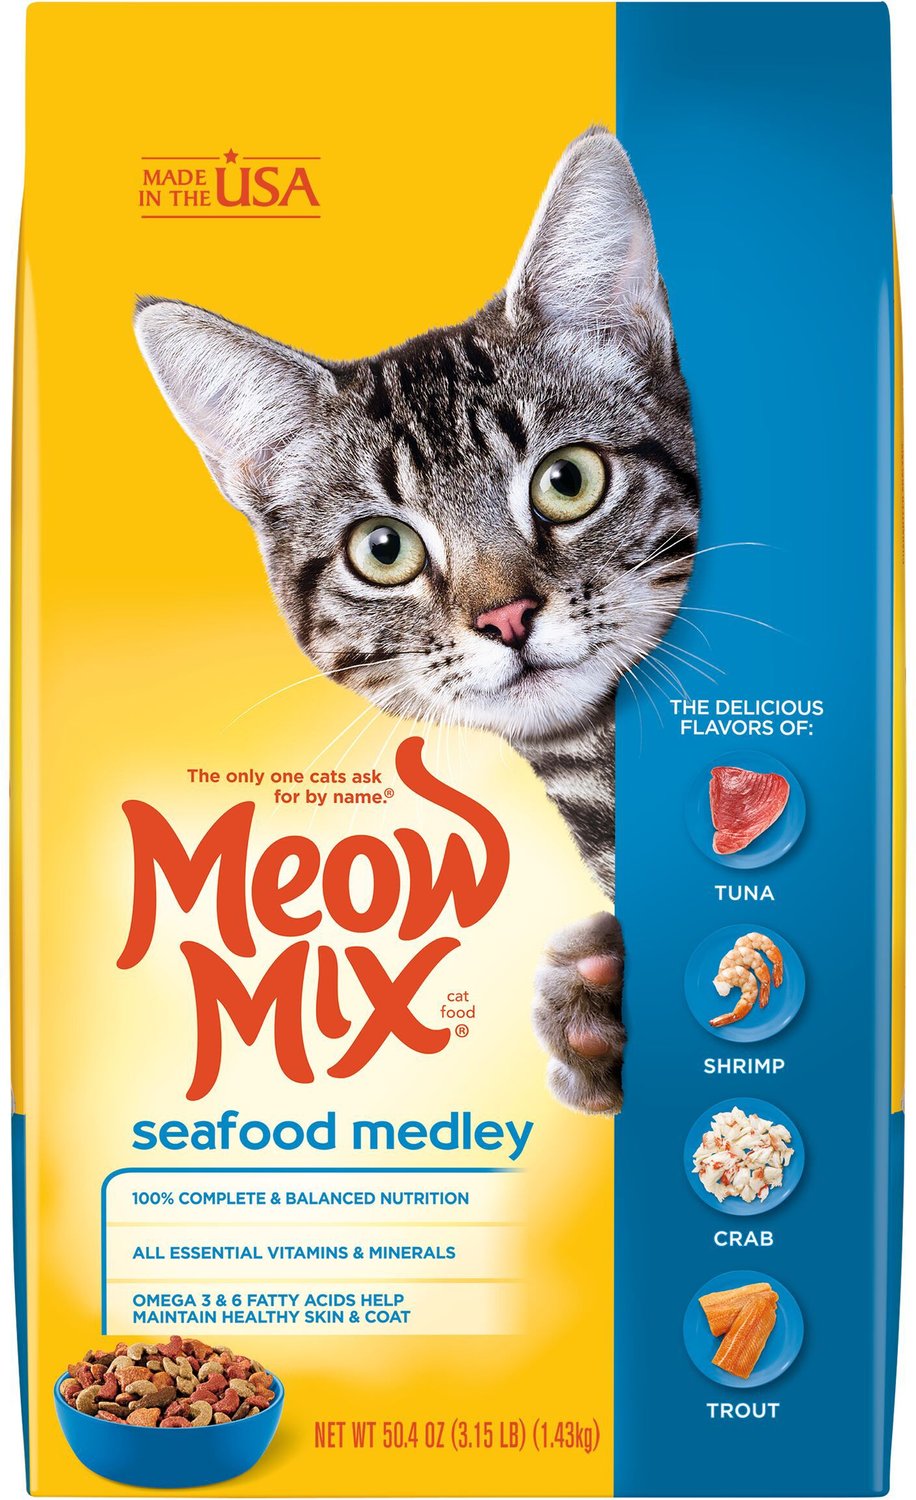 Meow Mix Seafood Medley Dry Cat Food, 3.15-lb bag - Chewy.com